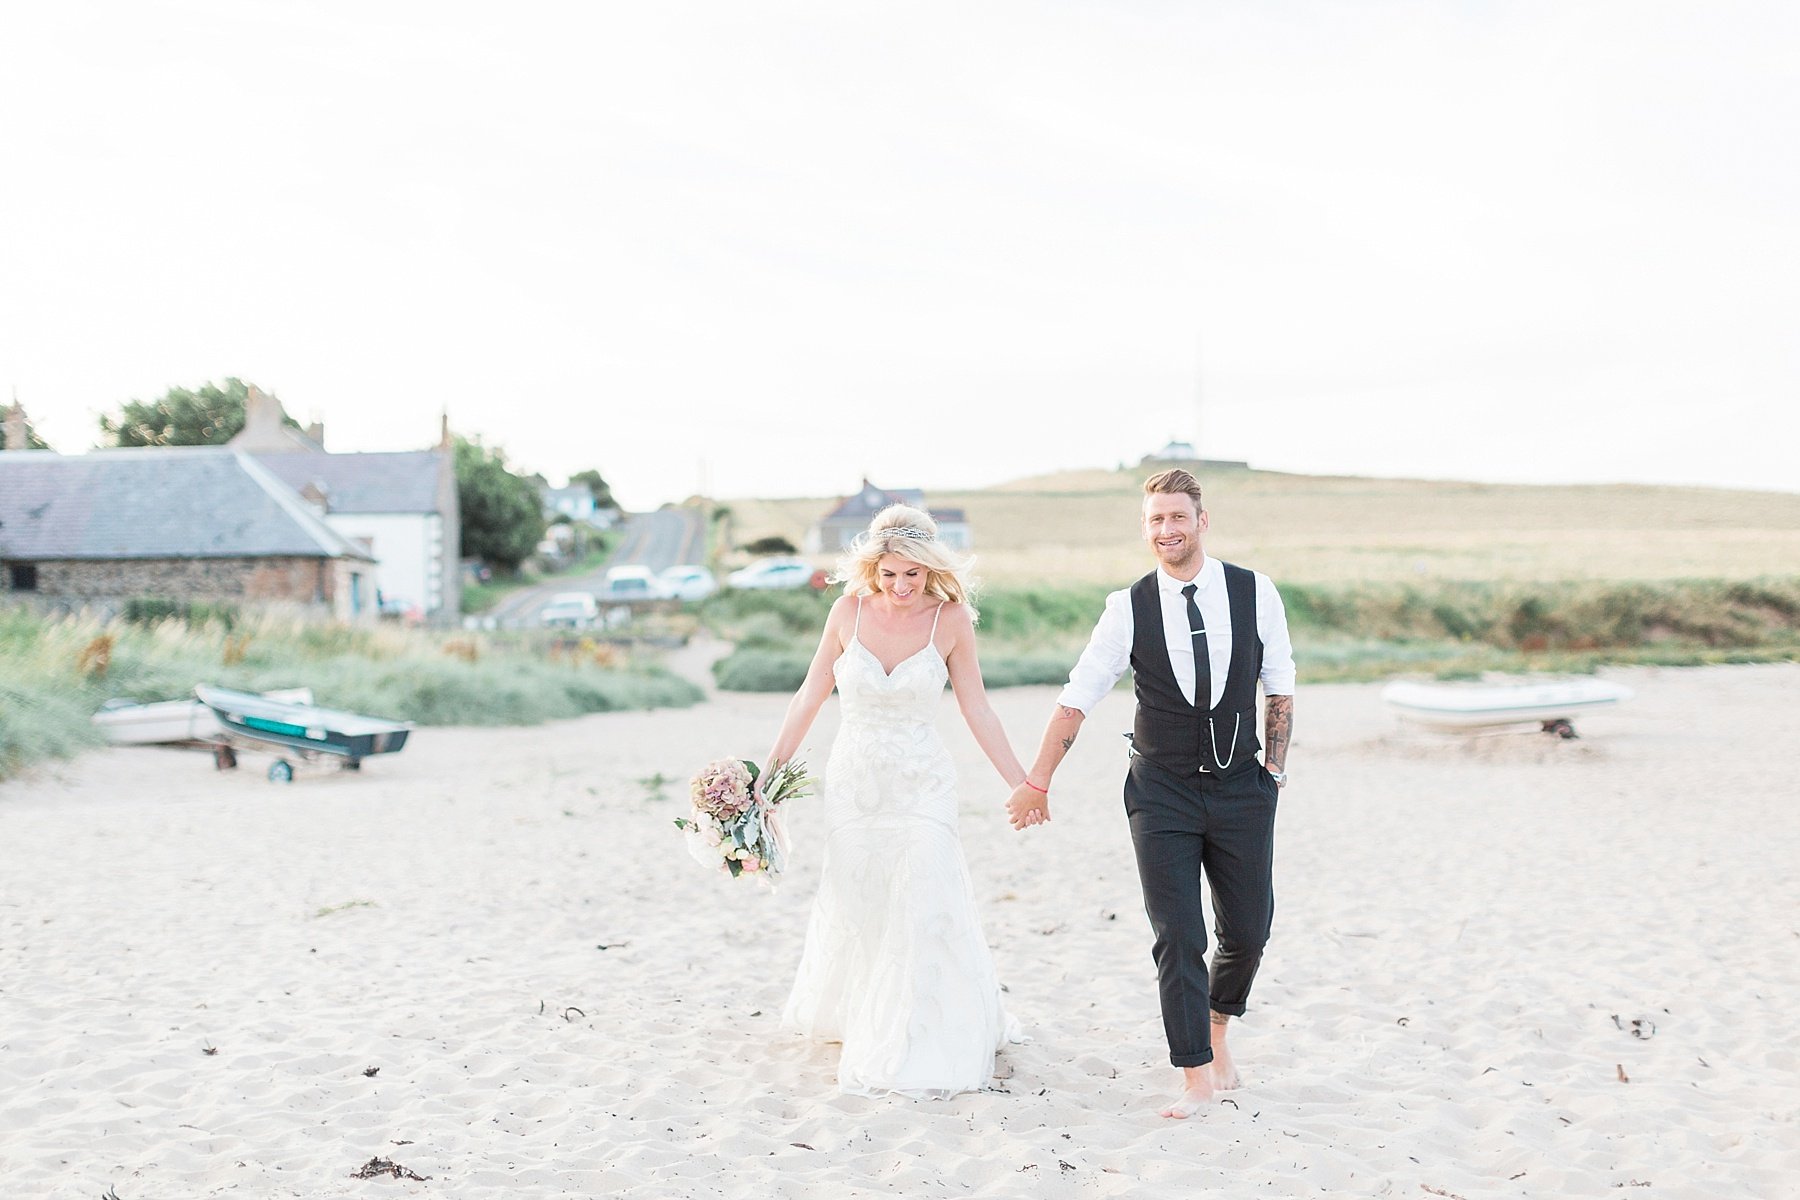 Four reasons to have a beautiful beach wedding